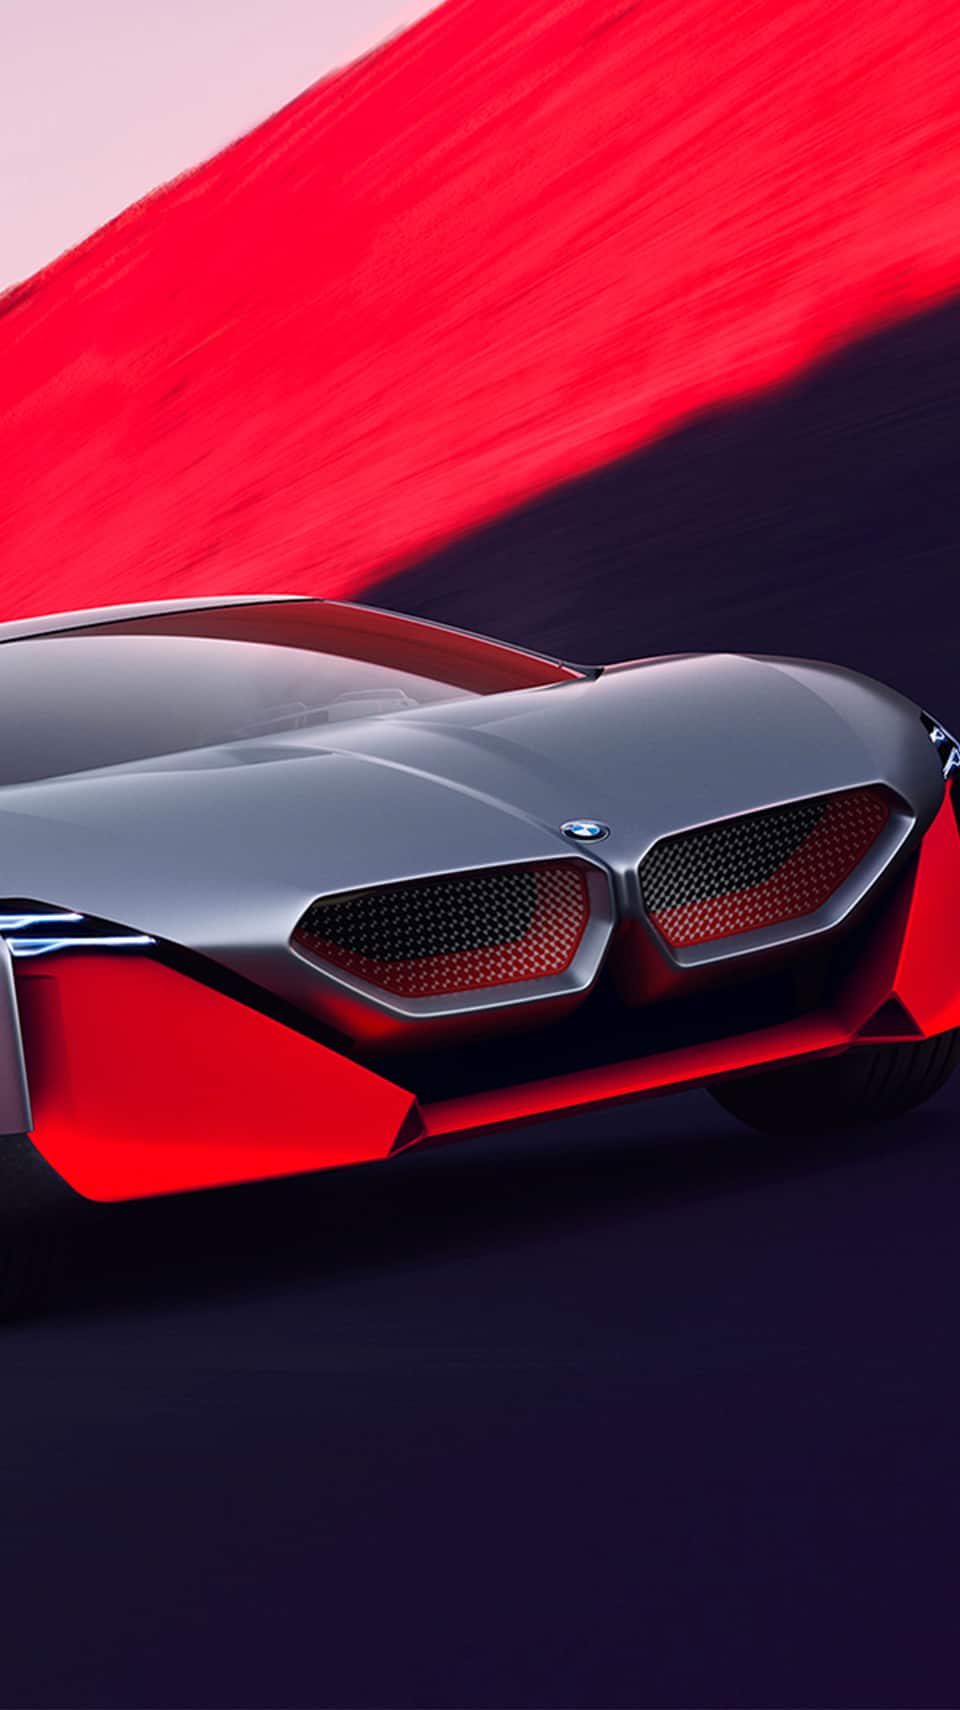 Experience the BMW Vision M NEXT